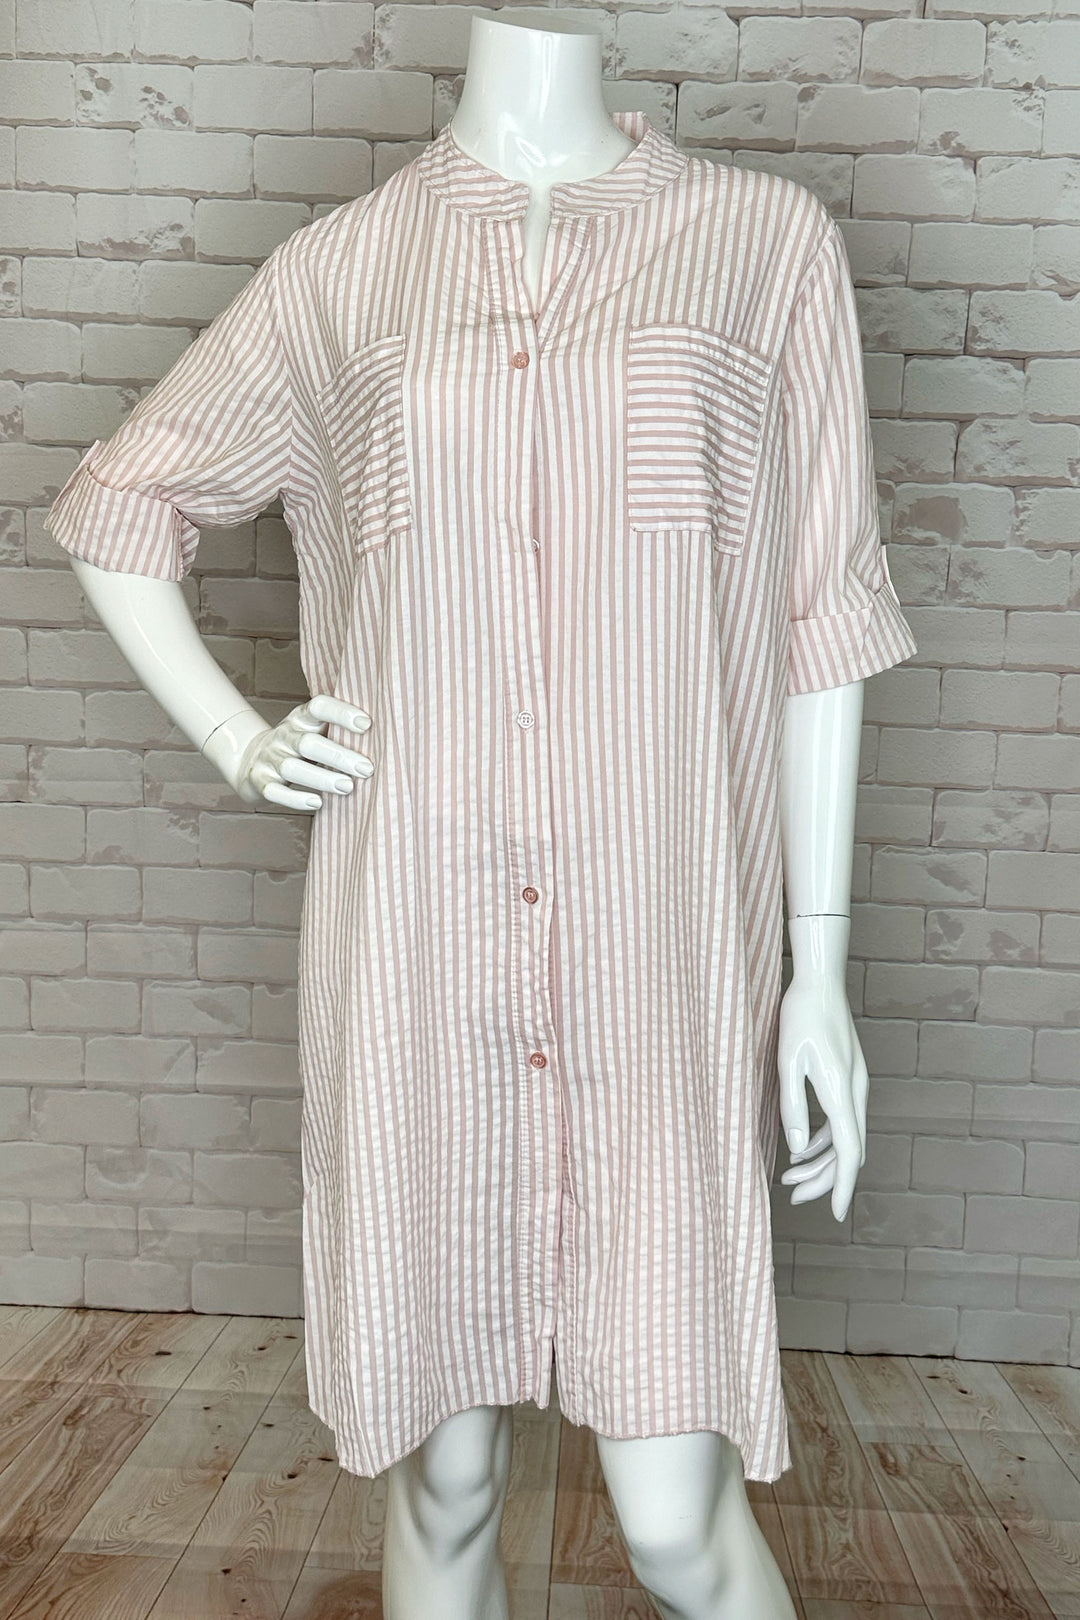 With a light and airy feel, front button closure and relaxed fit, this dress will become your go-to casual house dress! 